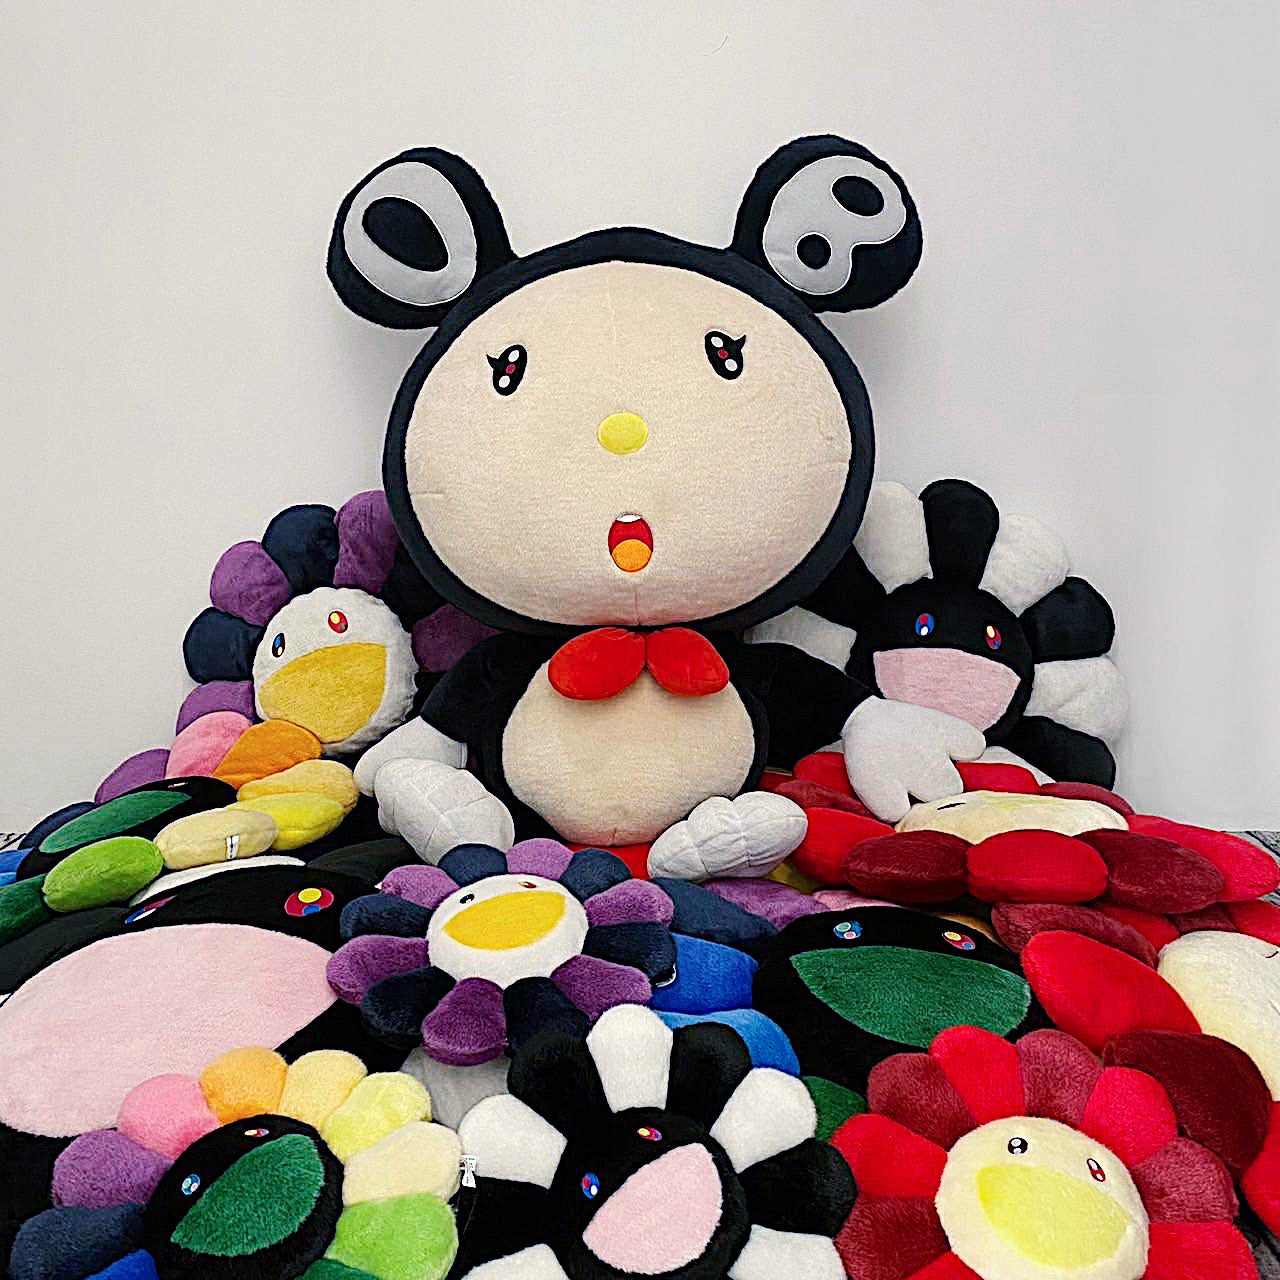 【Store limited release / STORE'S ONLY】<br> A lot of goods are now on sale, such as the popular flower cushions from "©Takashi Murakami / kaikai kiki"!